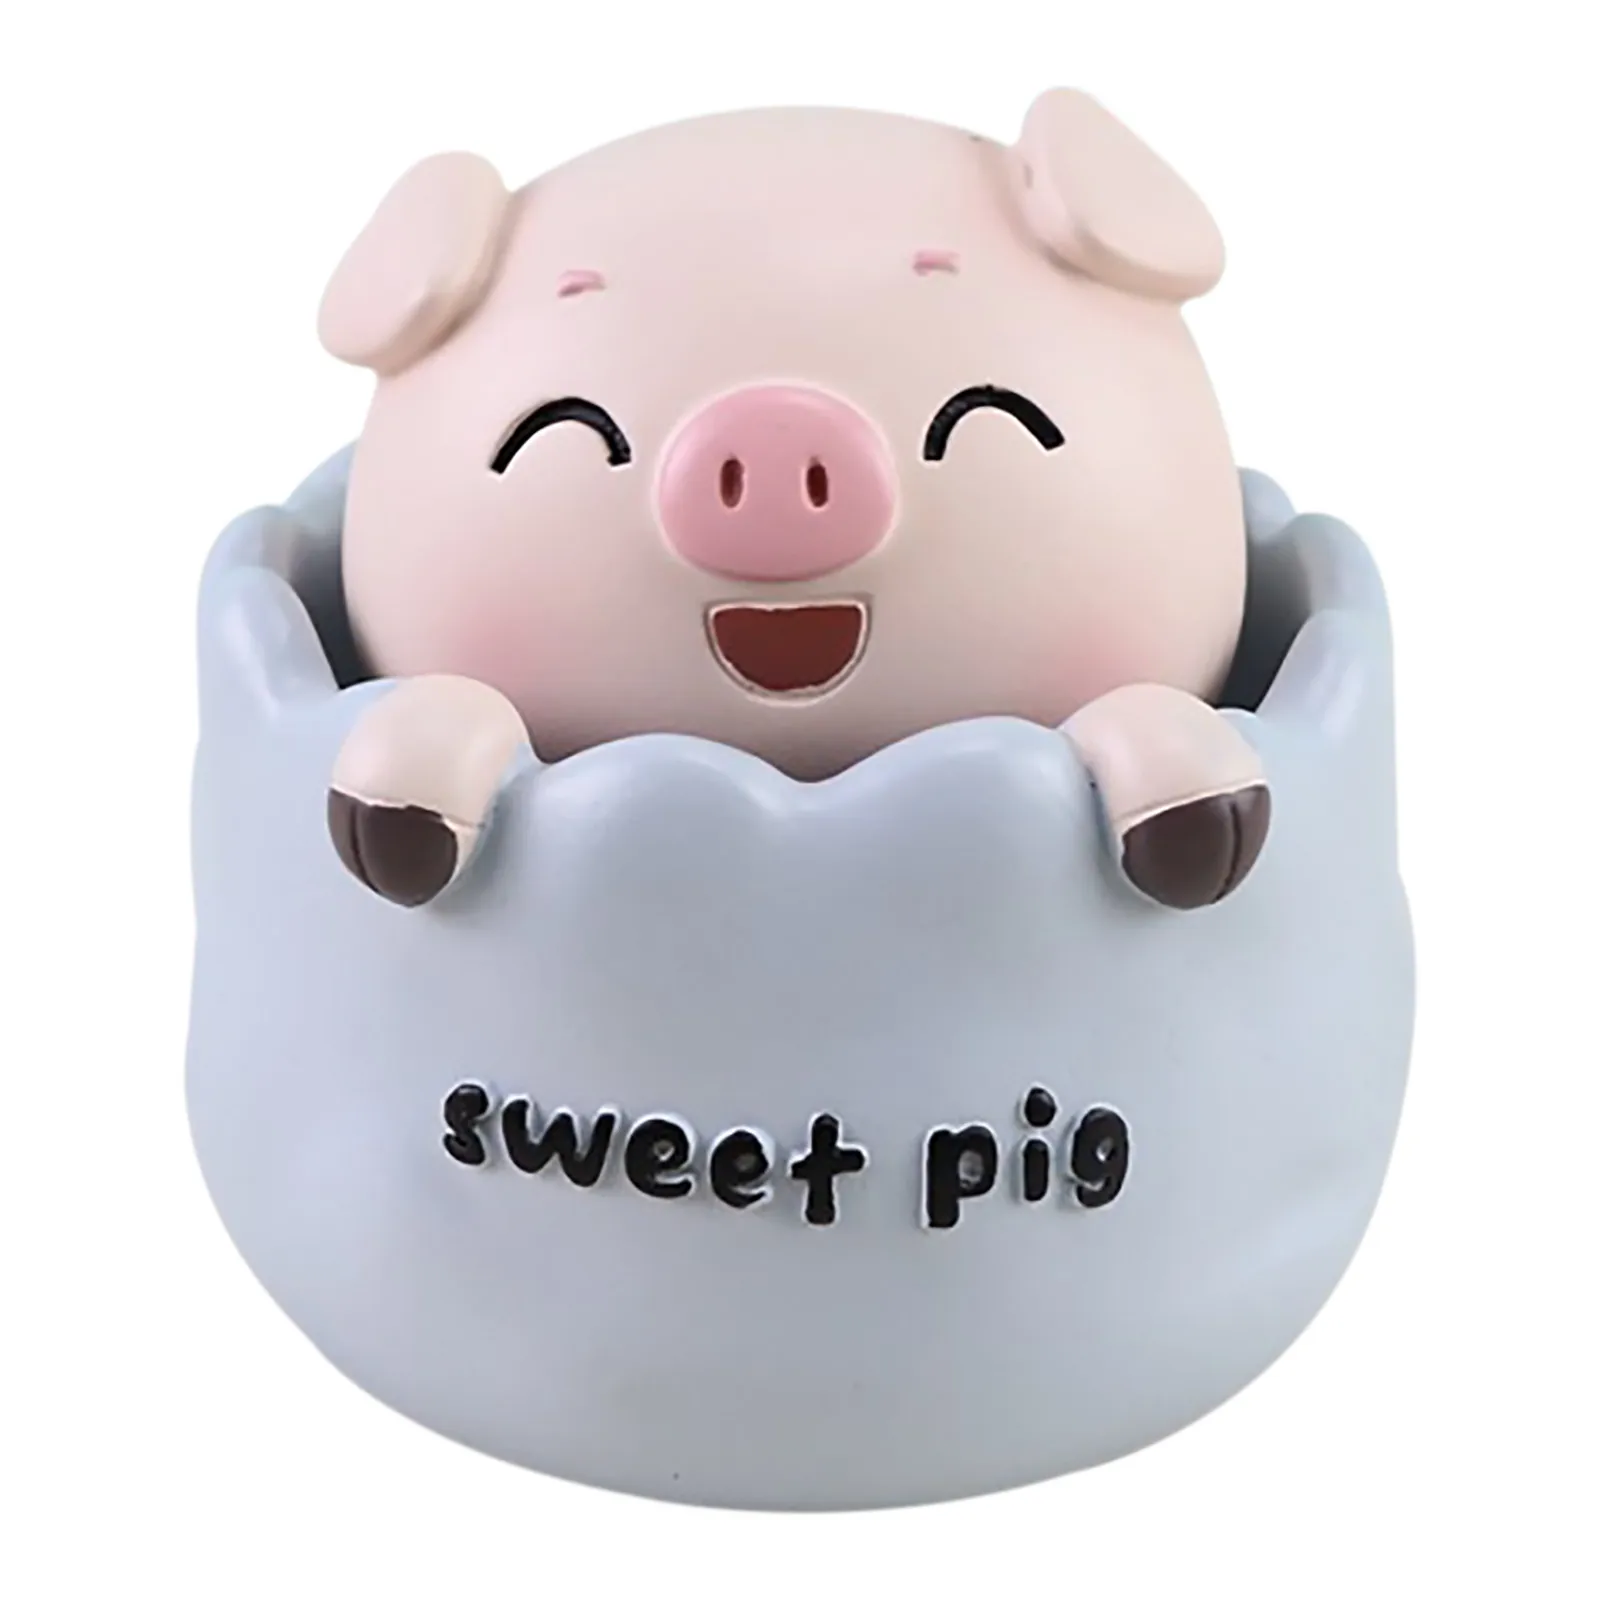 Kids Birthday Gift Creative Resin Shaking Head Happy Pig for Home Decor 